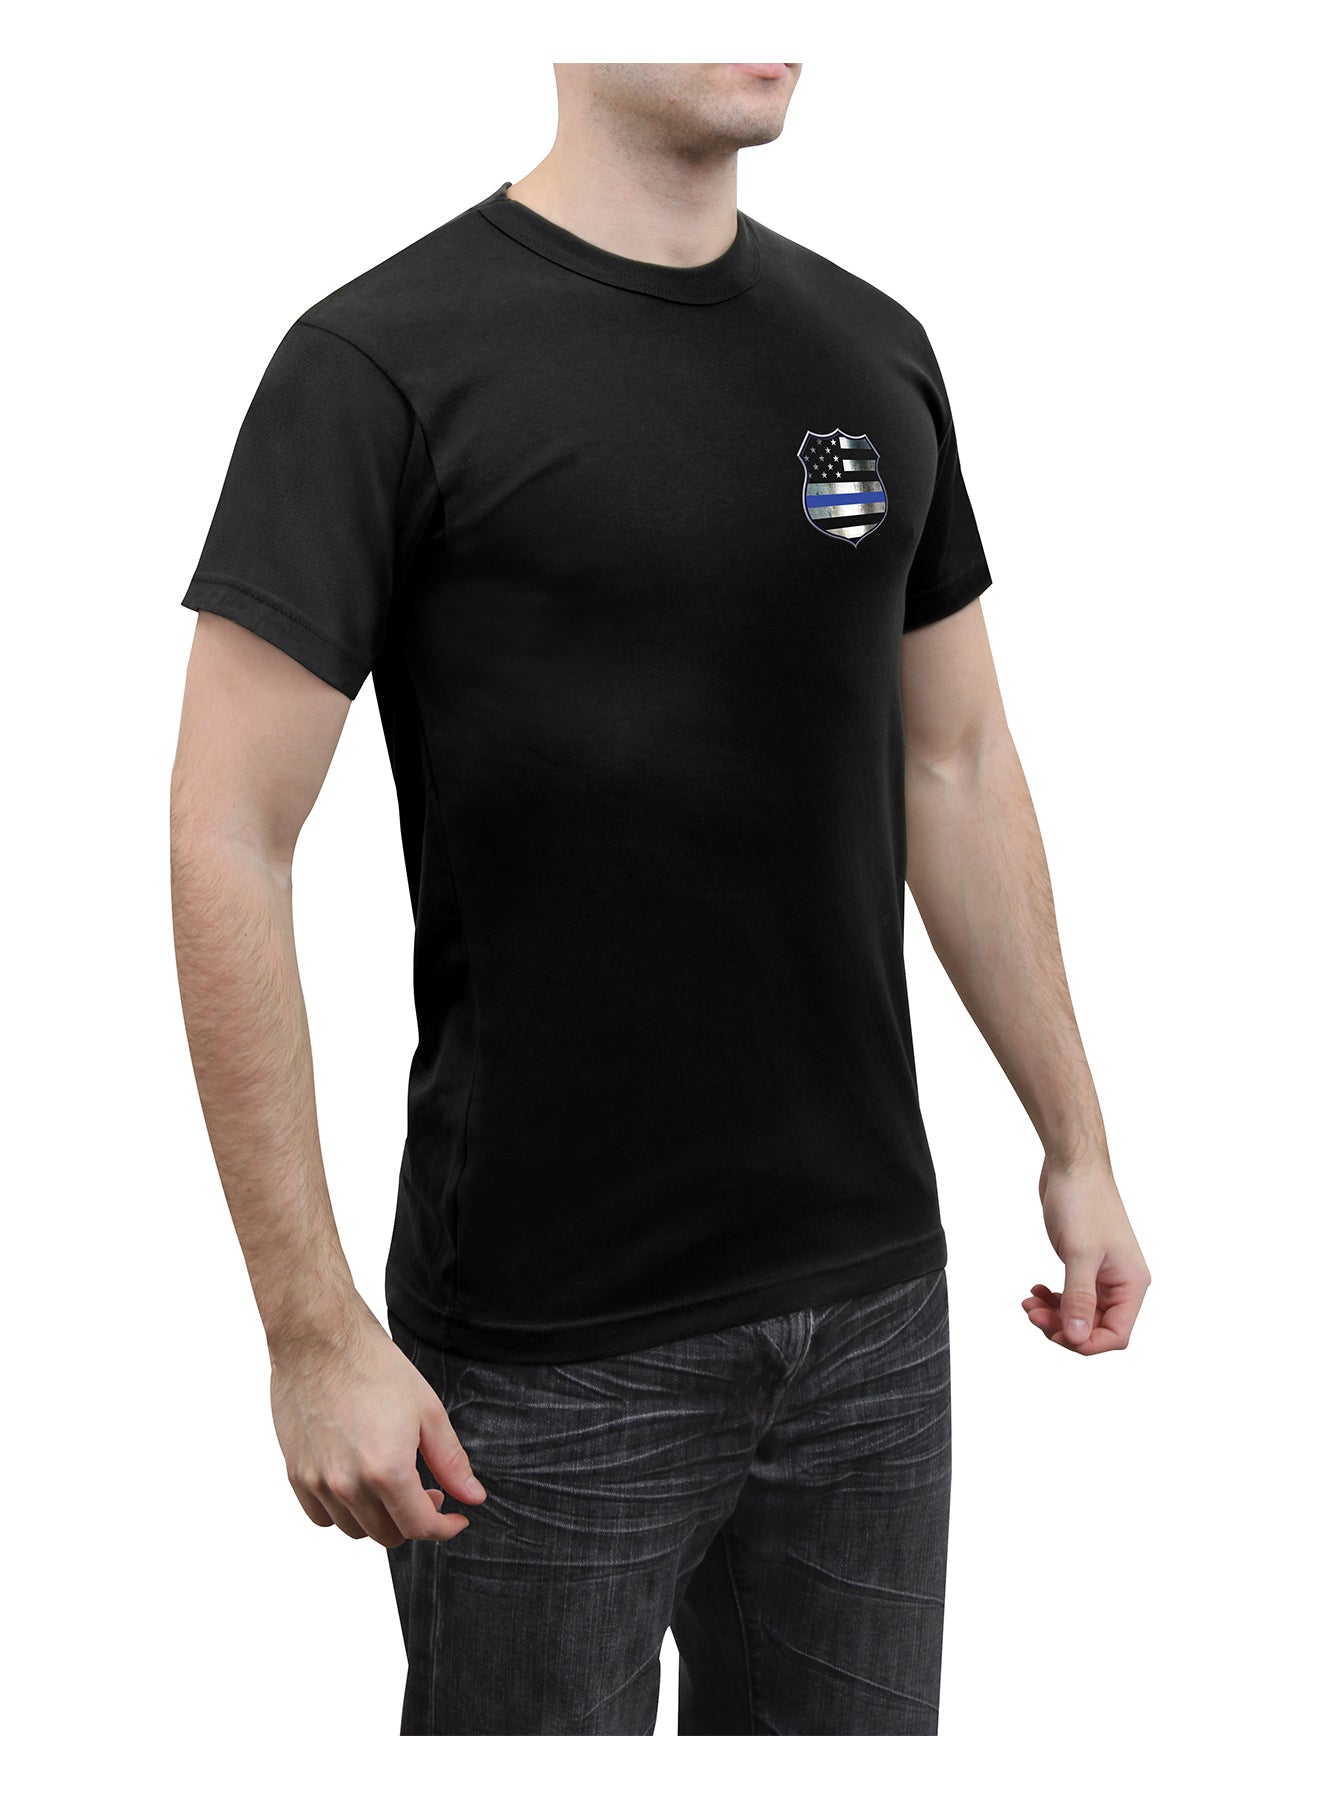 [Public Safety] Poly/Cotton Shield & Thin Blue Line Athletic Fit T-Shirts